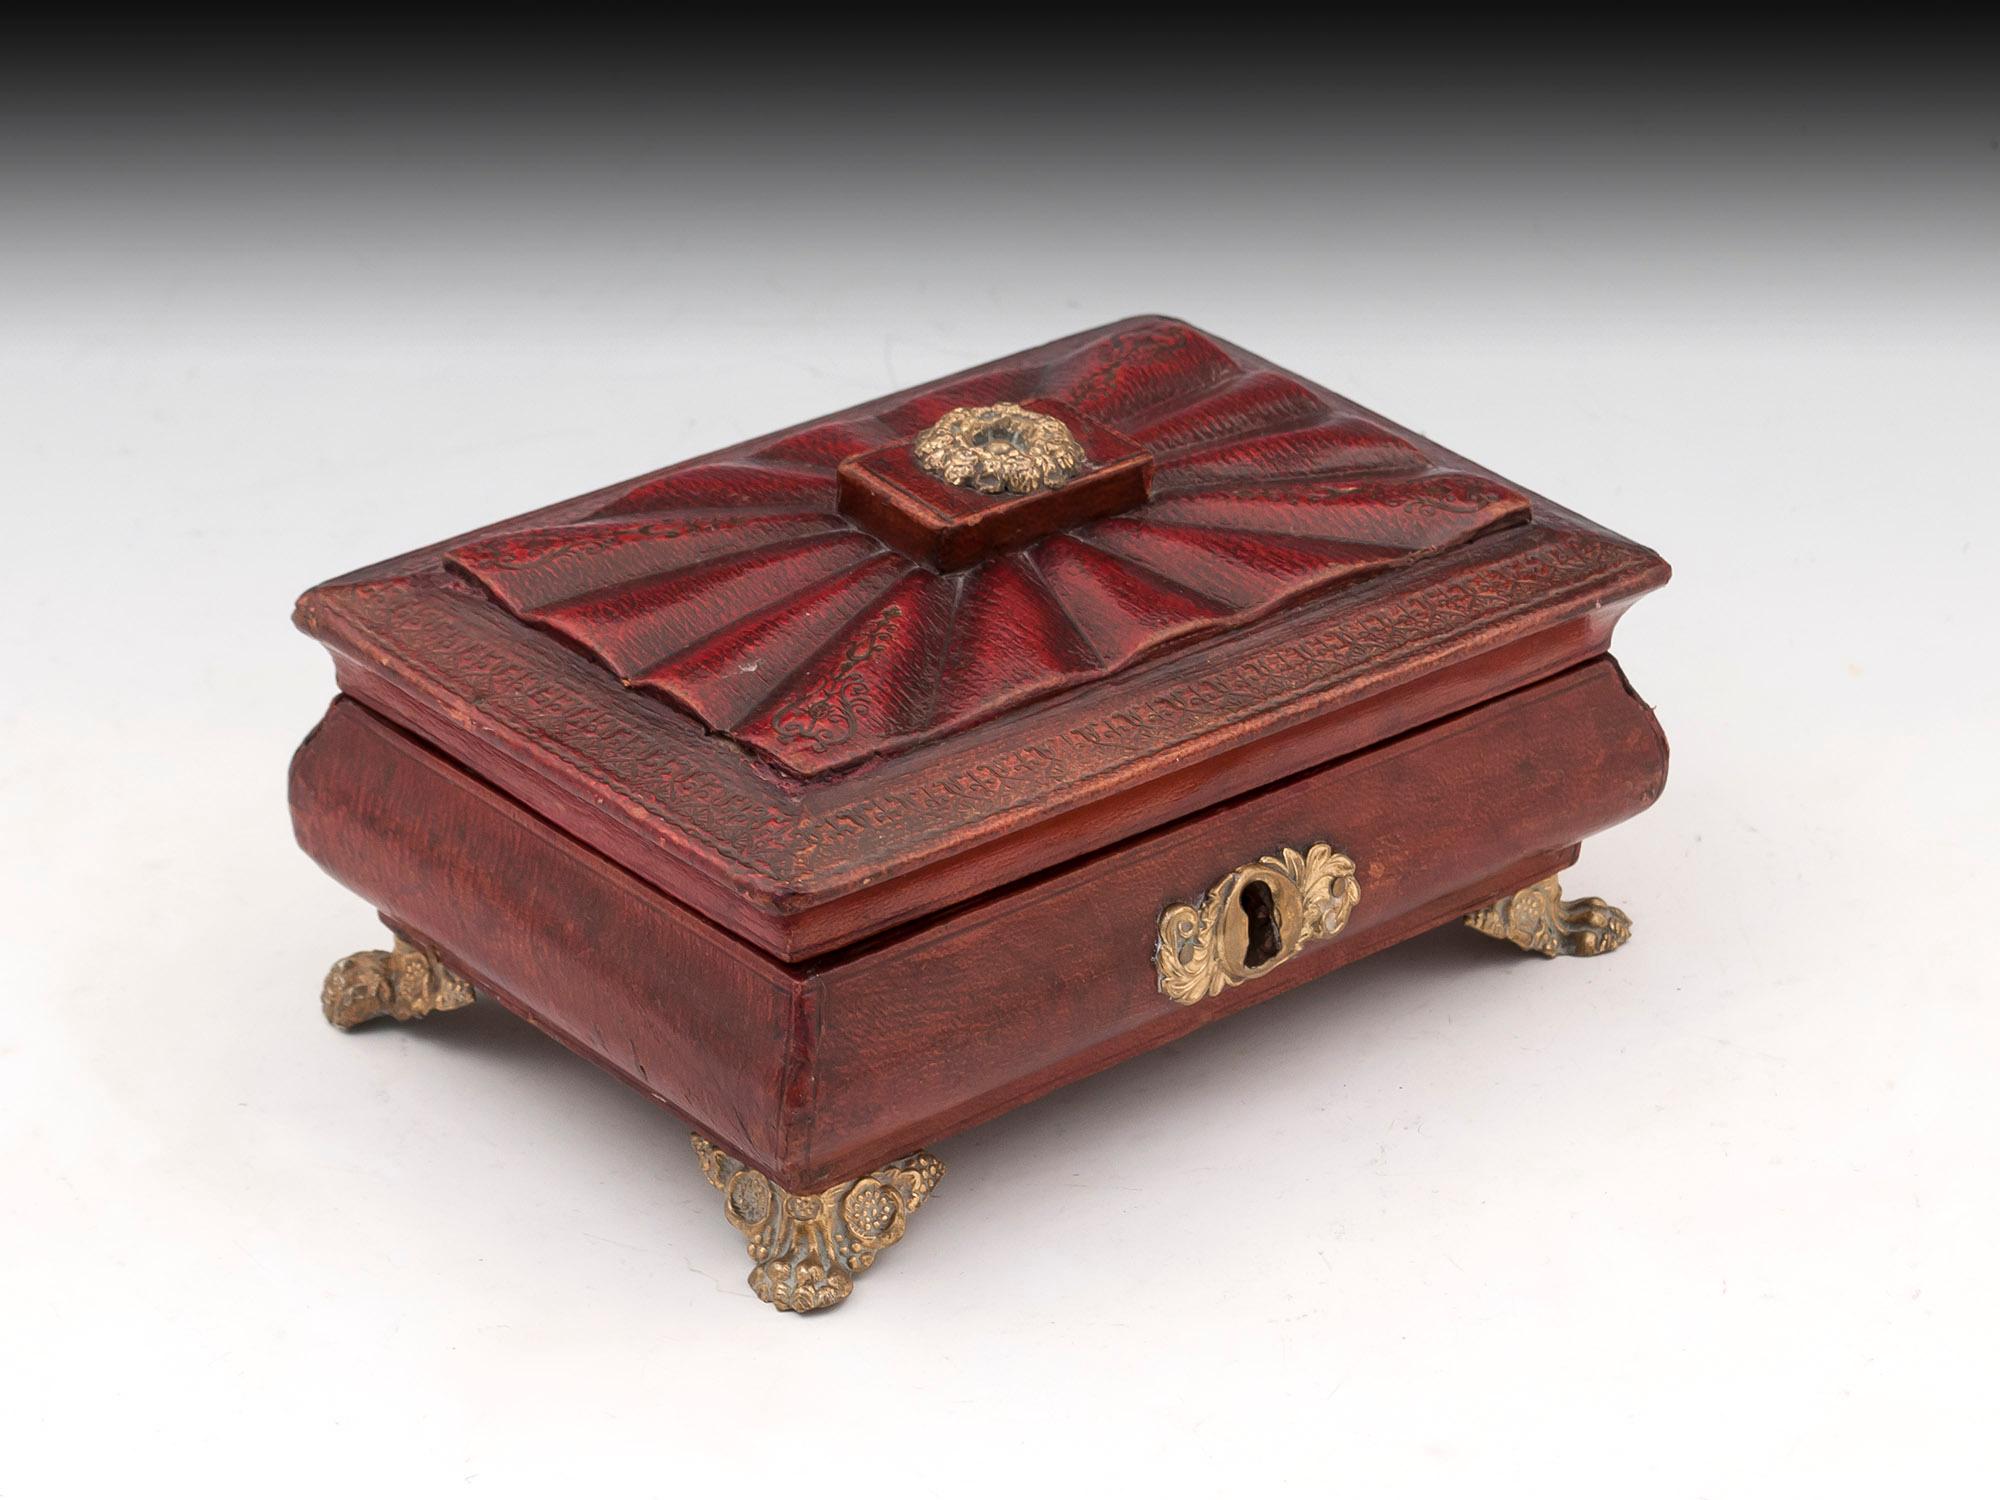 Regency Antique Red Leather Brass Bone Sewing Needlework Box In Good Condition For Sale In Northampton, United Kingdom